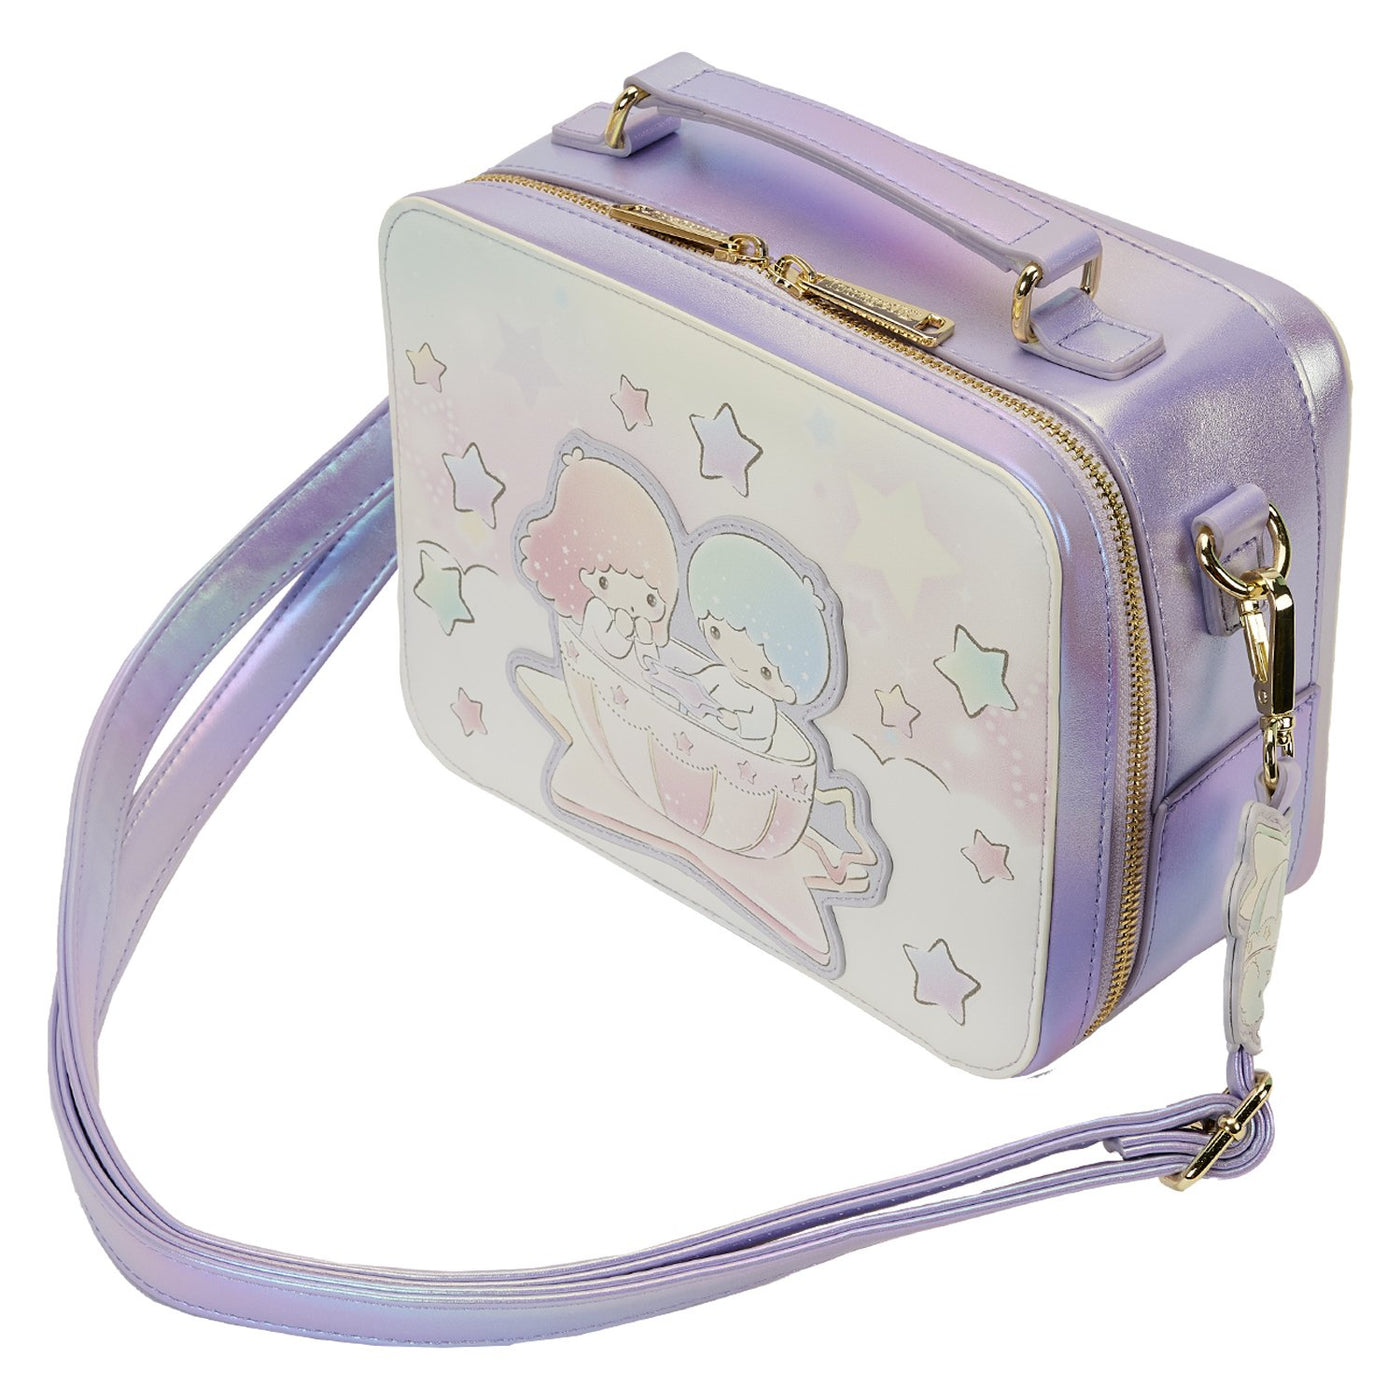 Loungefly Sanrio Little Twin Stars Carnival Crossbody - Top View